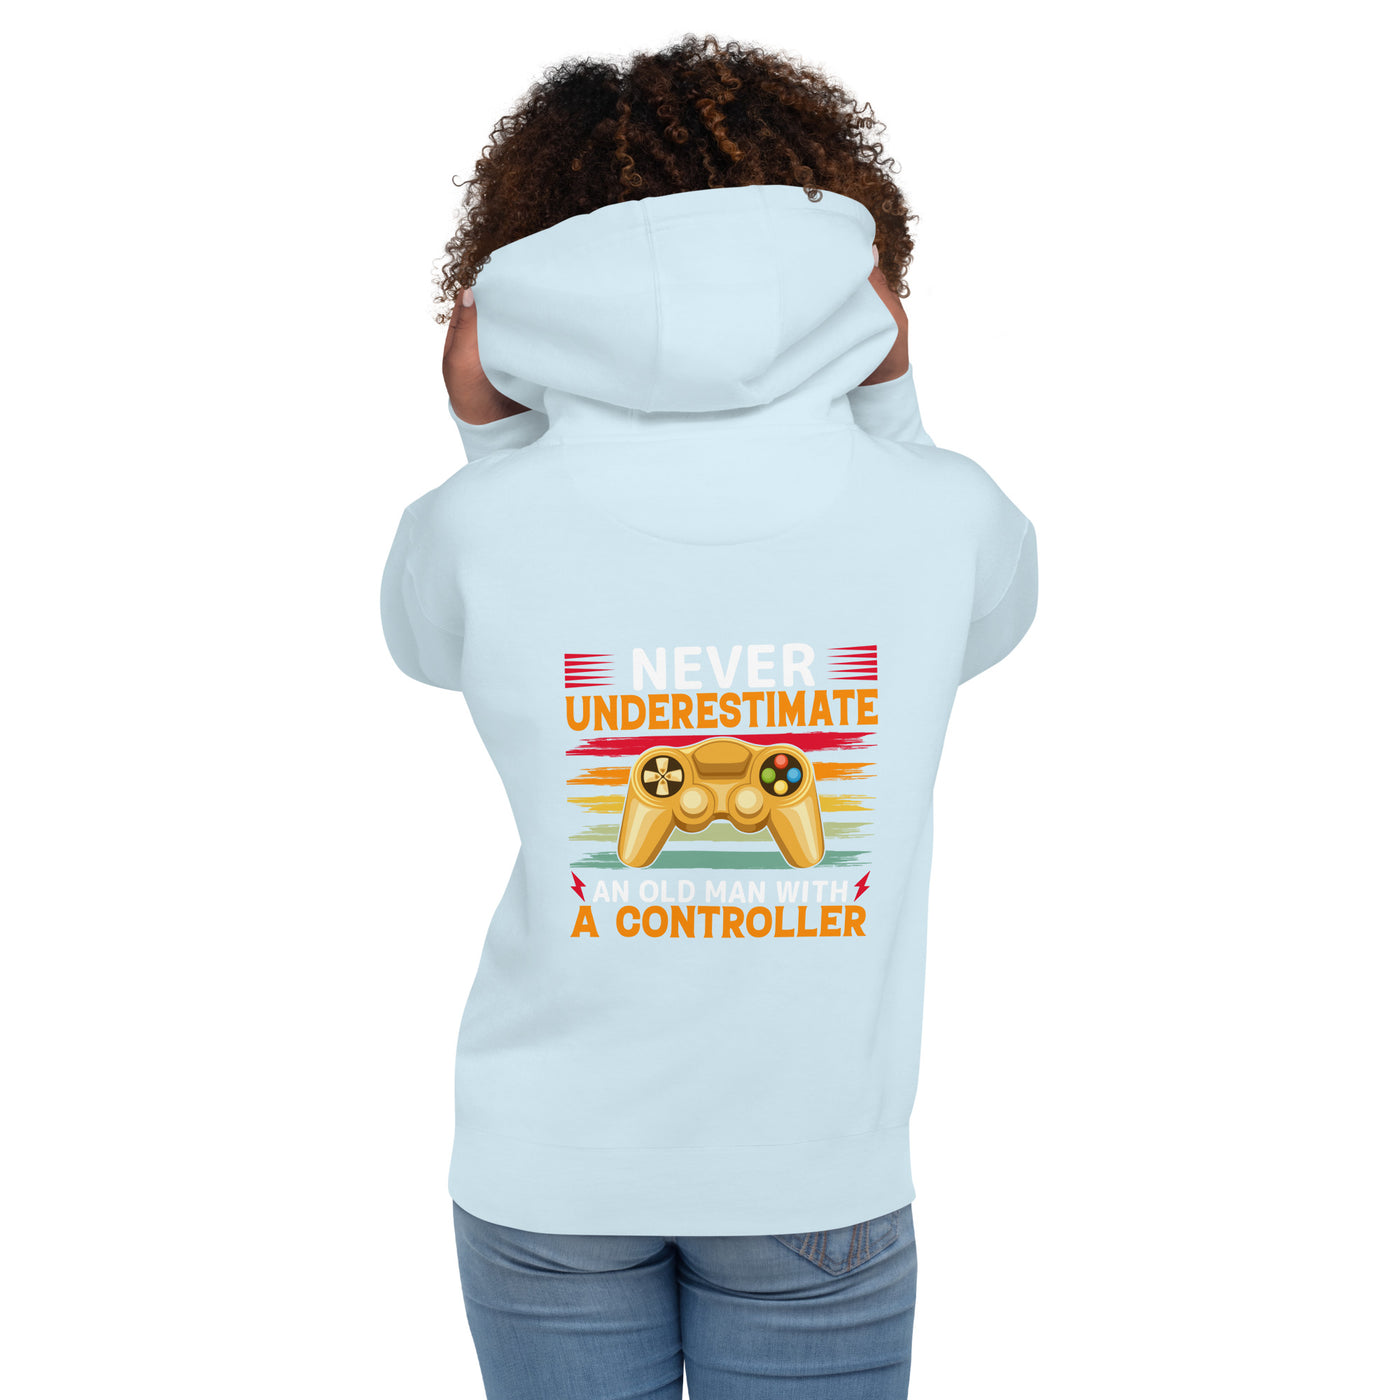 Never Underestimate an old man with a controller - Unisex Hoodie ( Back Print )